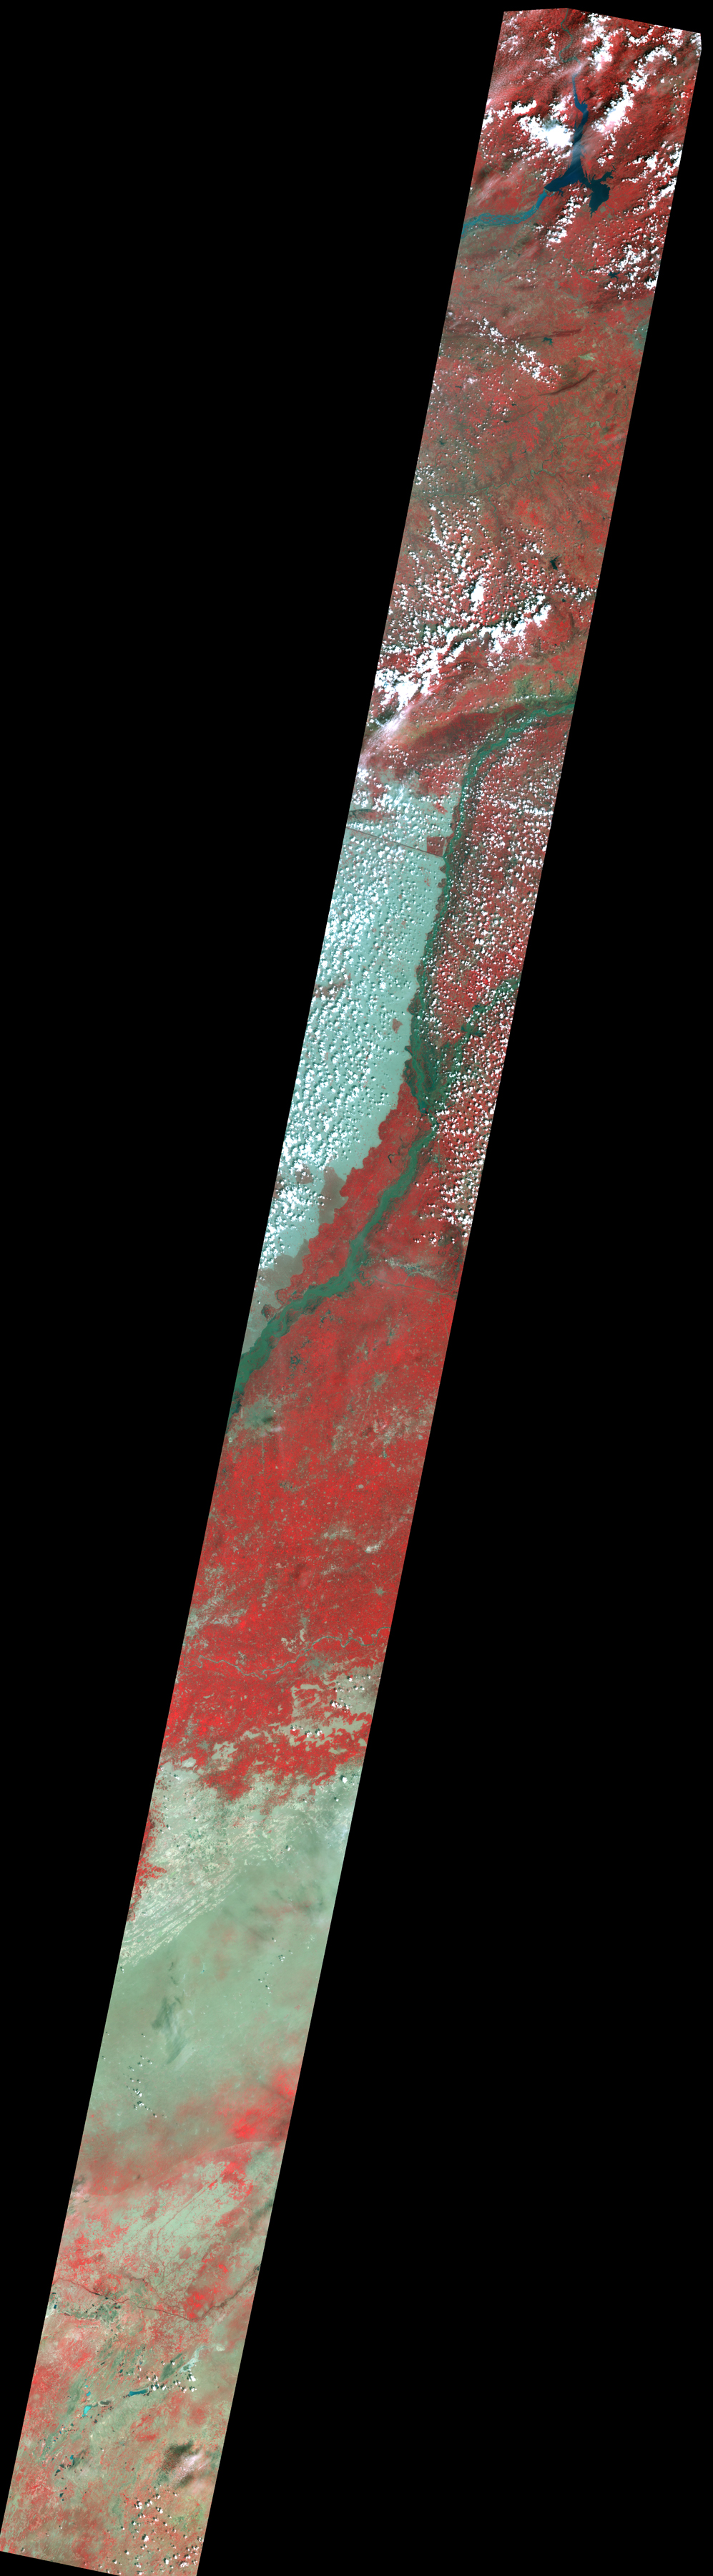 Fig.1(False color): AVNIR-2 image with 0.0 degree pointing angle acquired at 15:00 on September 1, 2010 (JST).